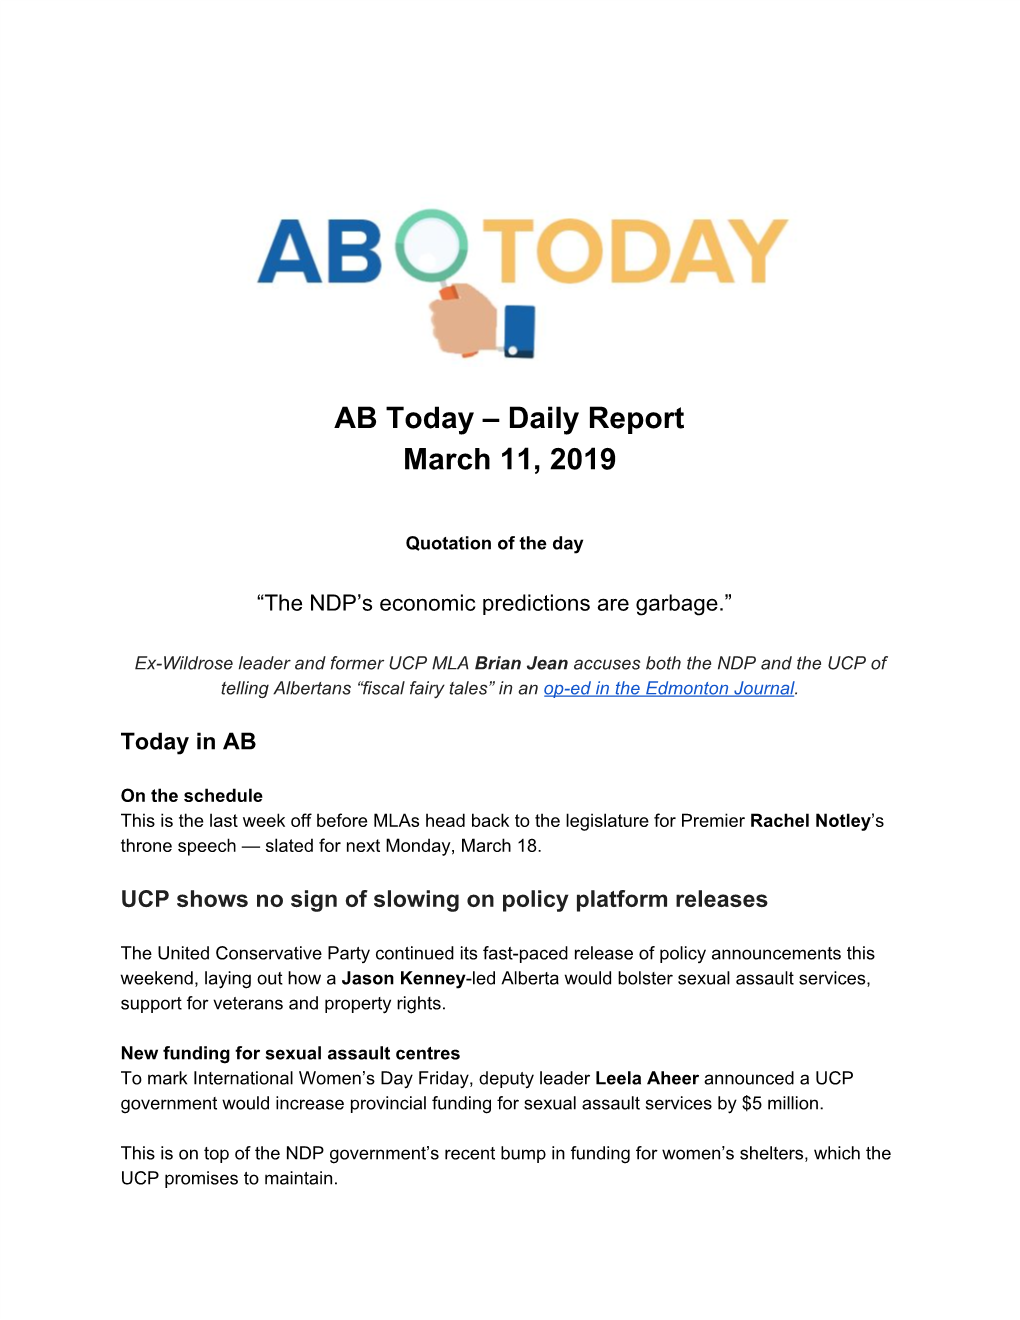 AB Today – Daily Report March 11, 2019